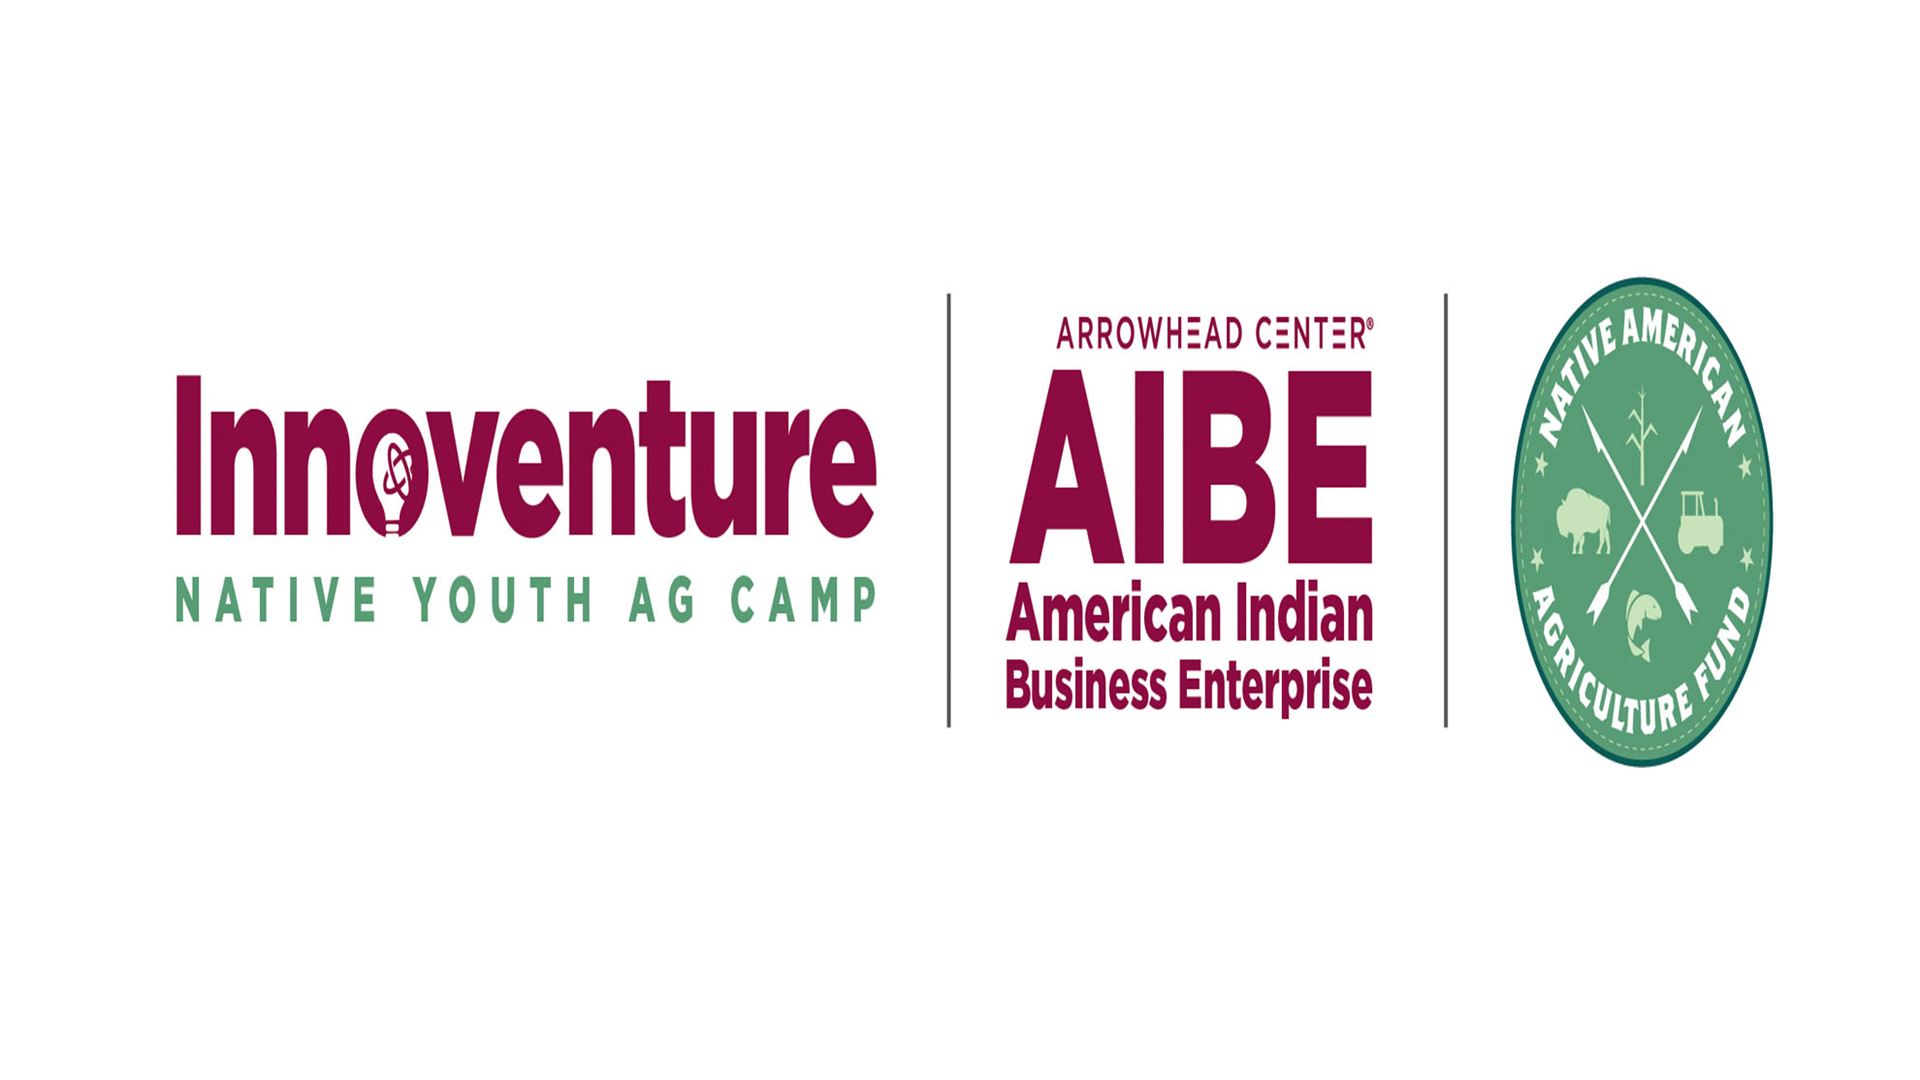 Native American youth grow business ideas during Innoventure youth ag camp